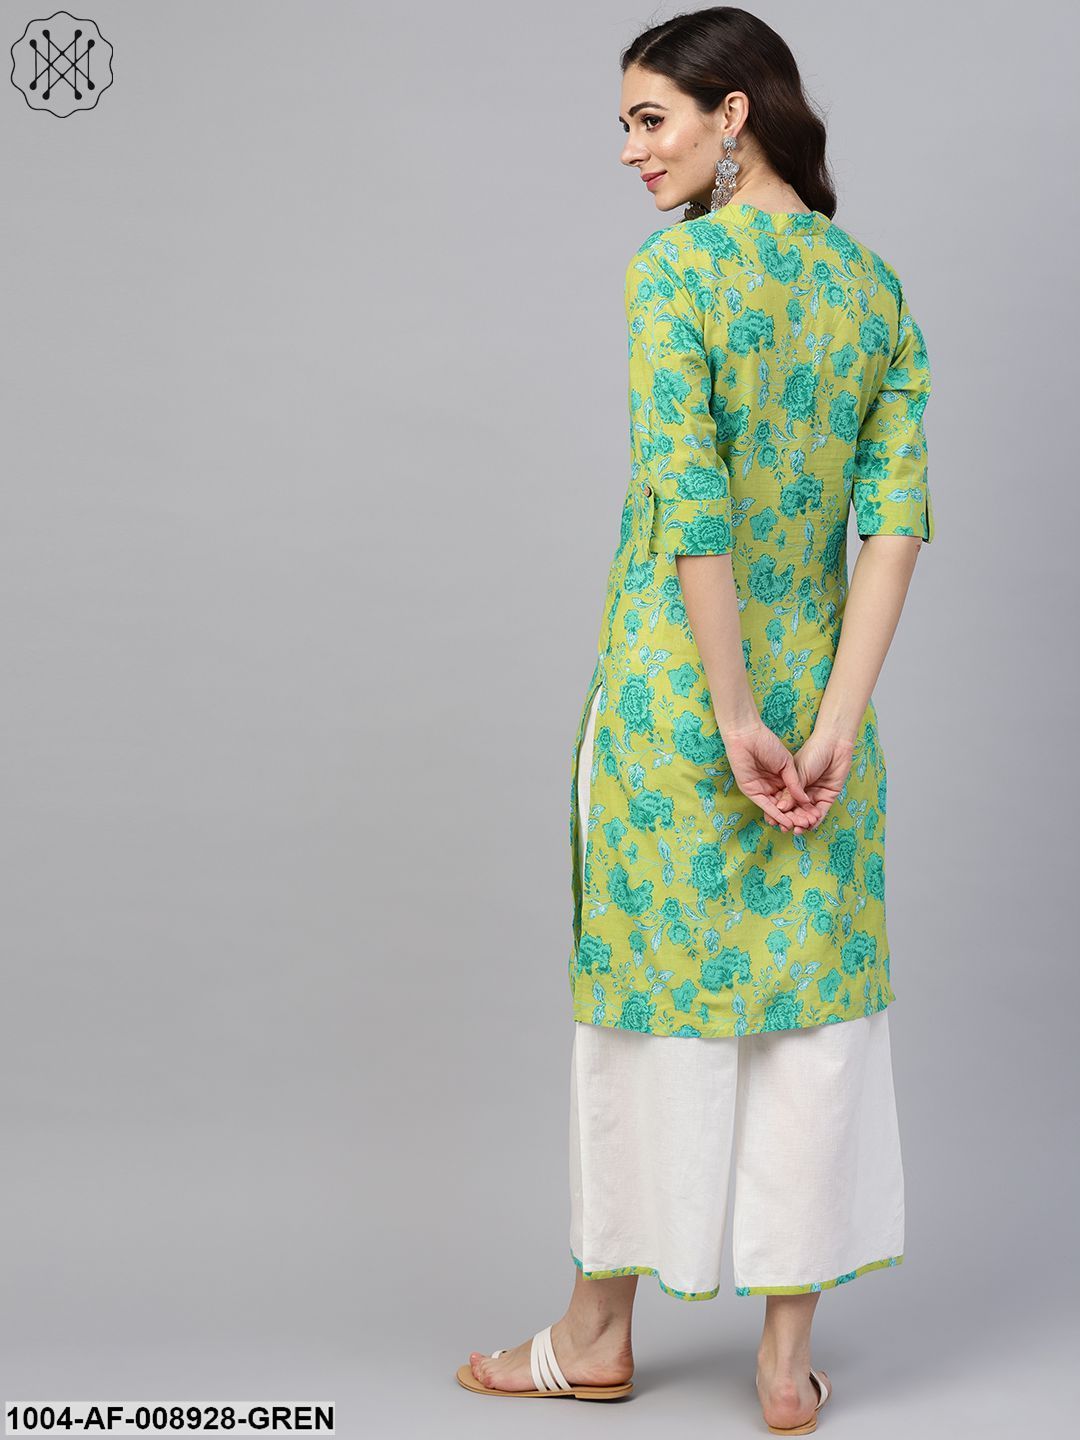 Fluorescent Green & Blue Floral Printed Kurta Set With White Palazzo With Print Detailing